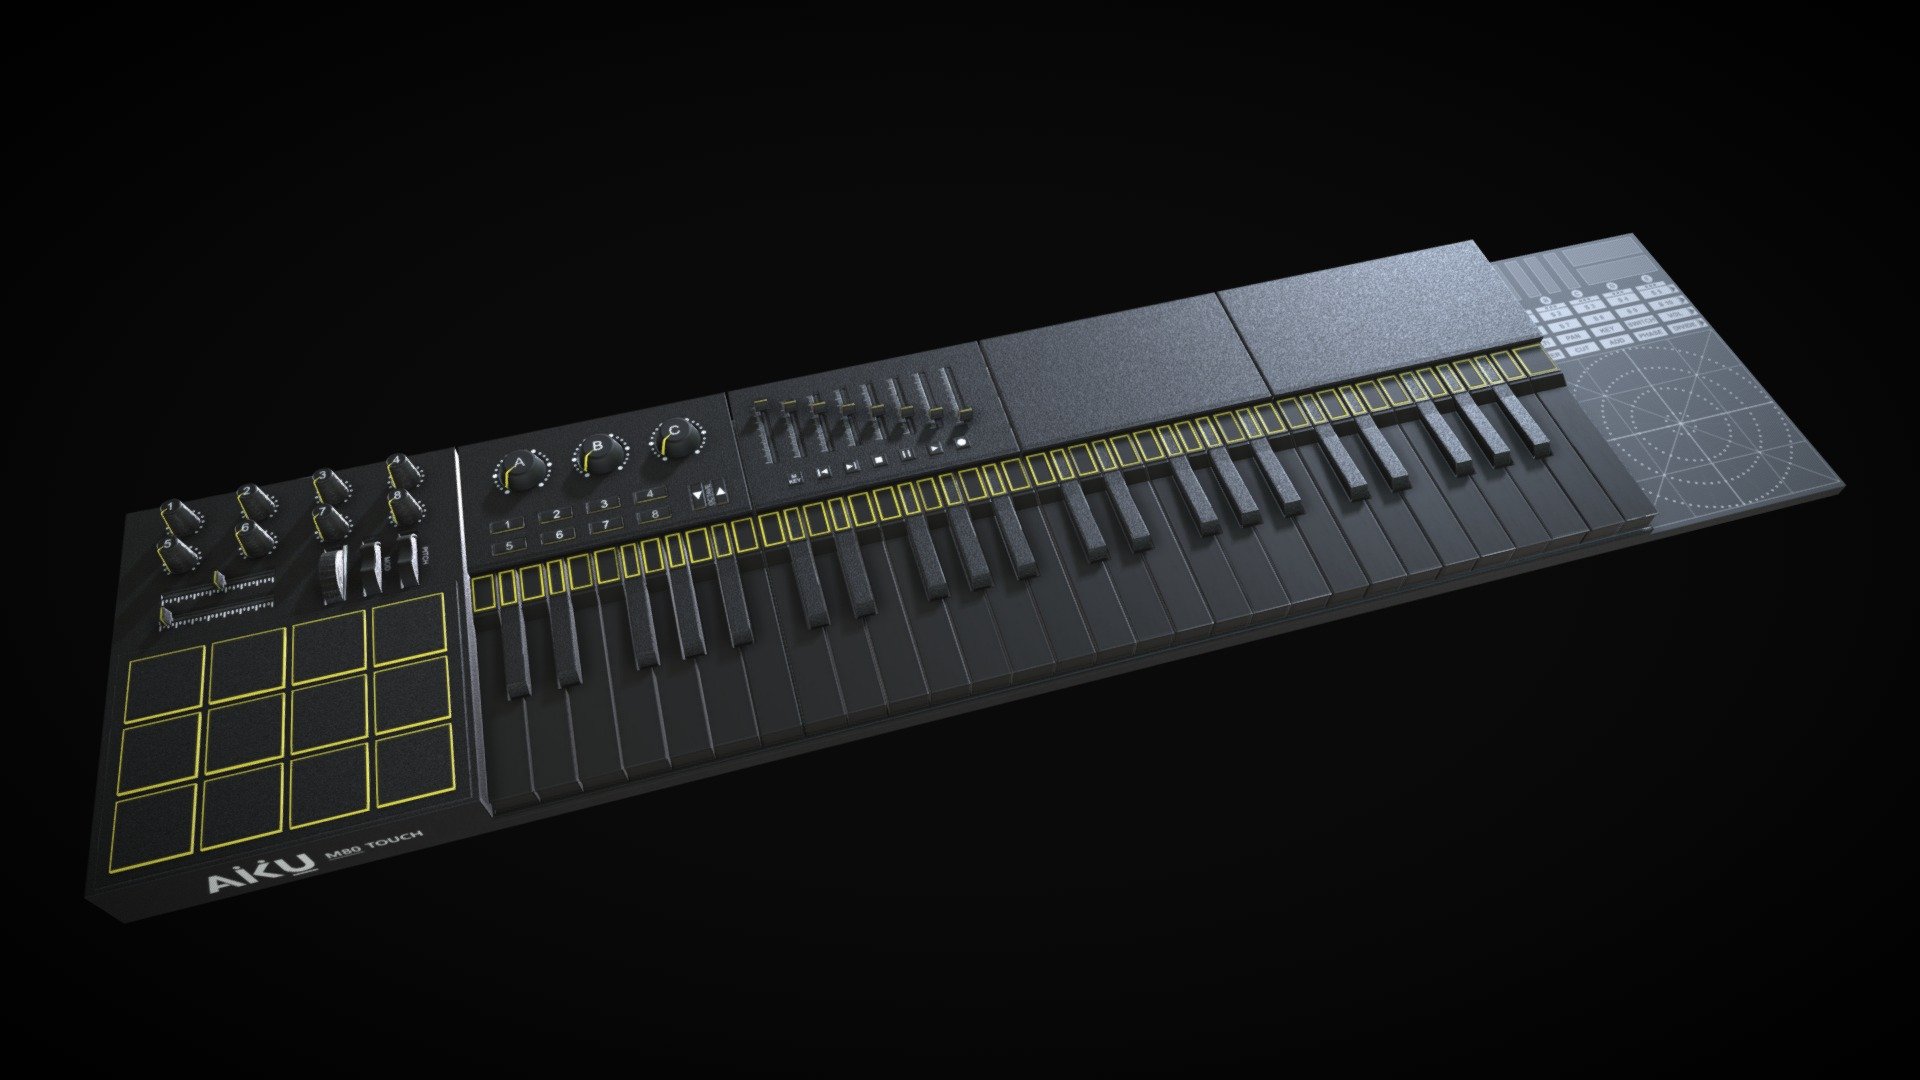 An original LED Midi keyboard design by a fake company called AKU, it has:
* 12 Pads 
* 4 Octive row keys 
* Pitch / Mod / and Volume wheel
* 2 Automated sliders
* 8 Automated knobs
* 3 Corse knobs
*  8 Trigger buttons
*  Octive control
*  EQ sliders
*  Media controls
*  A multi-purpose touchpad
*  Wireless BT or Wired
*  Wired audio inputs and outputs
*  And a stand on the bottom - Aku M80 Touch Midi Keyboard - Buy Royalty Free 3D model by Vilad 3d model